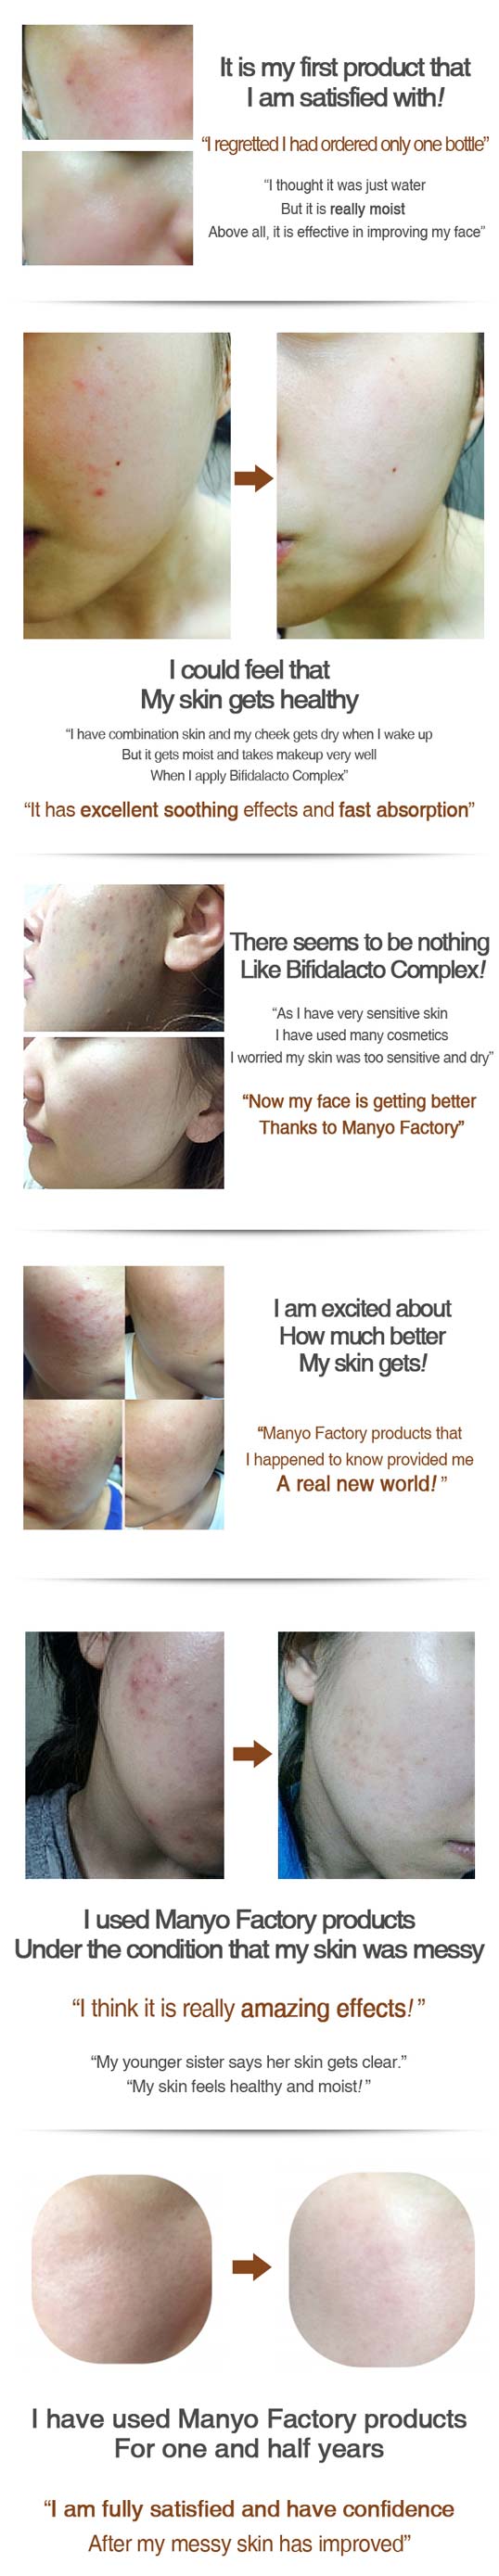 bifida ampoule essence customer feedback before and after use